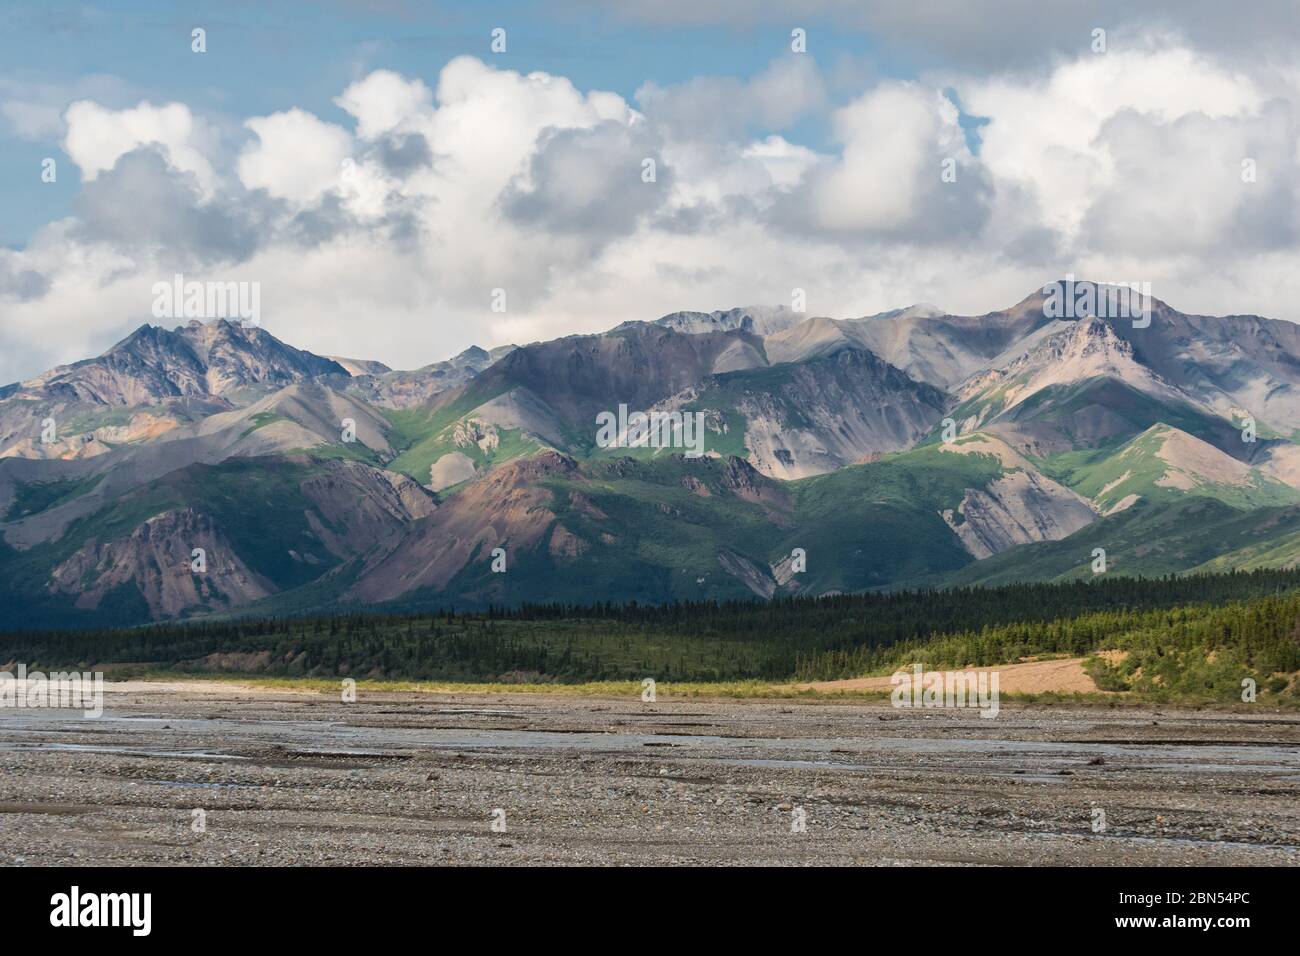 A braided river with rugged mountains and puffy clouds in the sky in Denali National Park, Alaska, USA Stock Photo